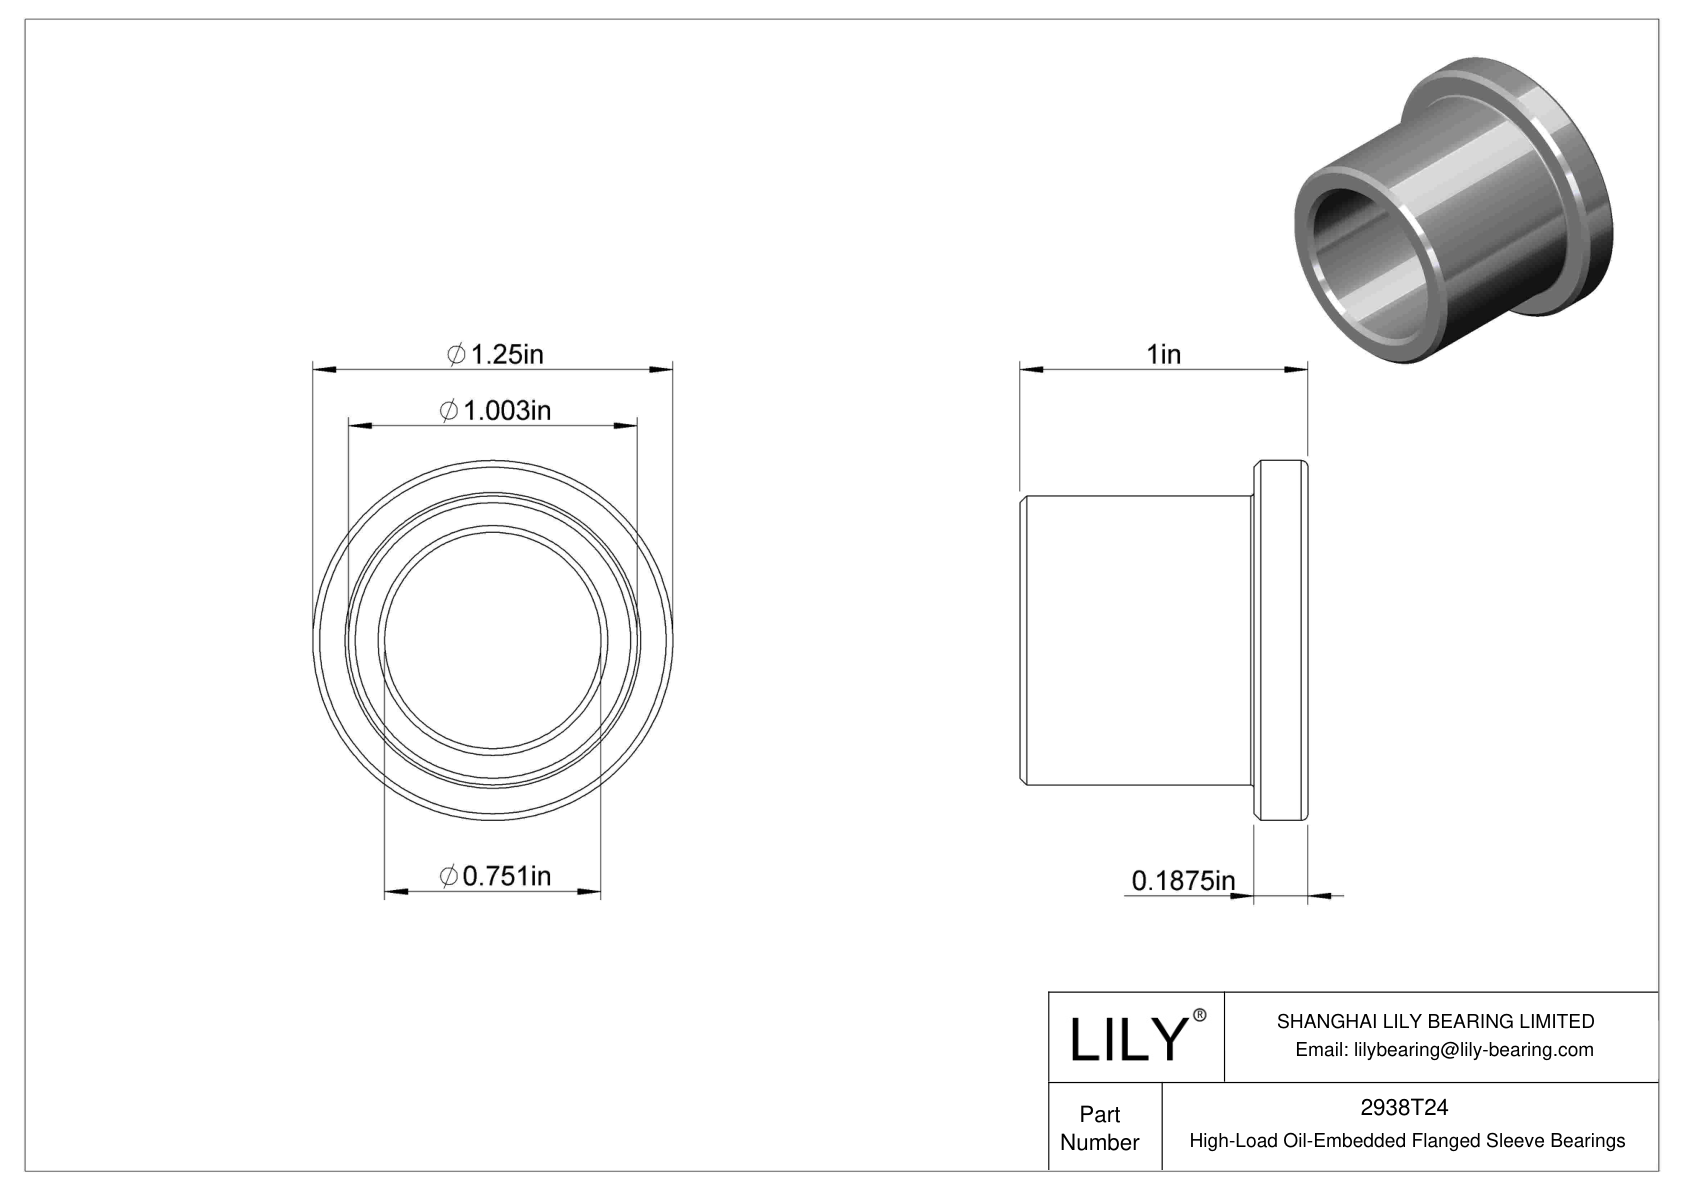 CJDITCE High-Load Oil-Embedded Flanged Sleeve Bearings cad drawing